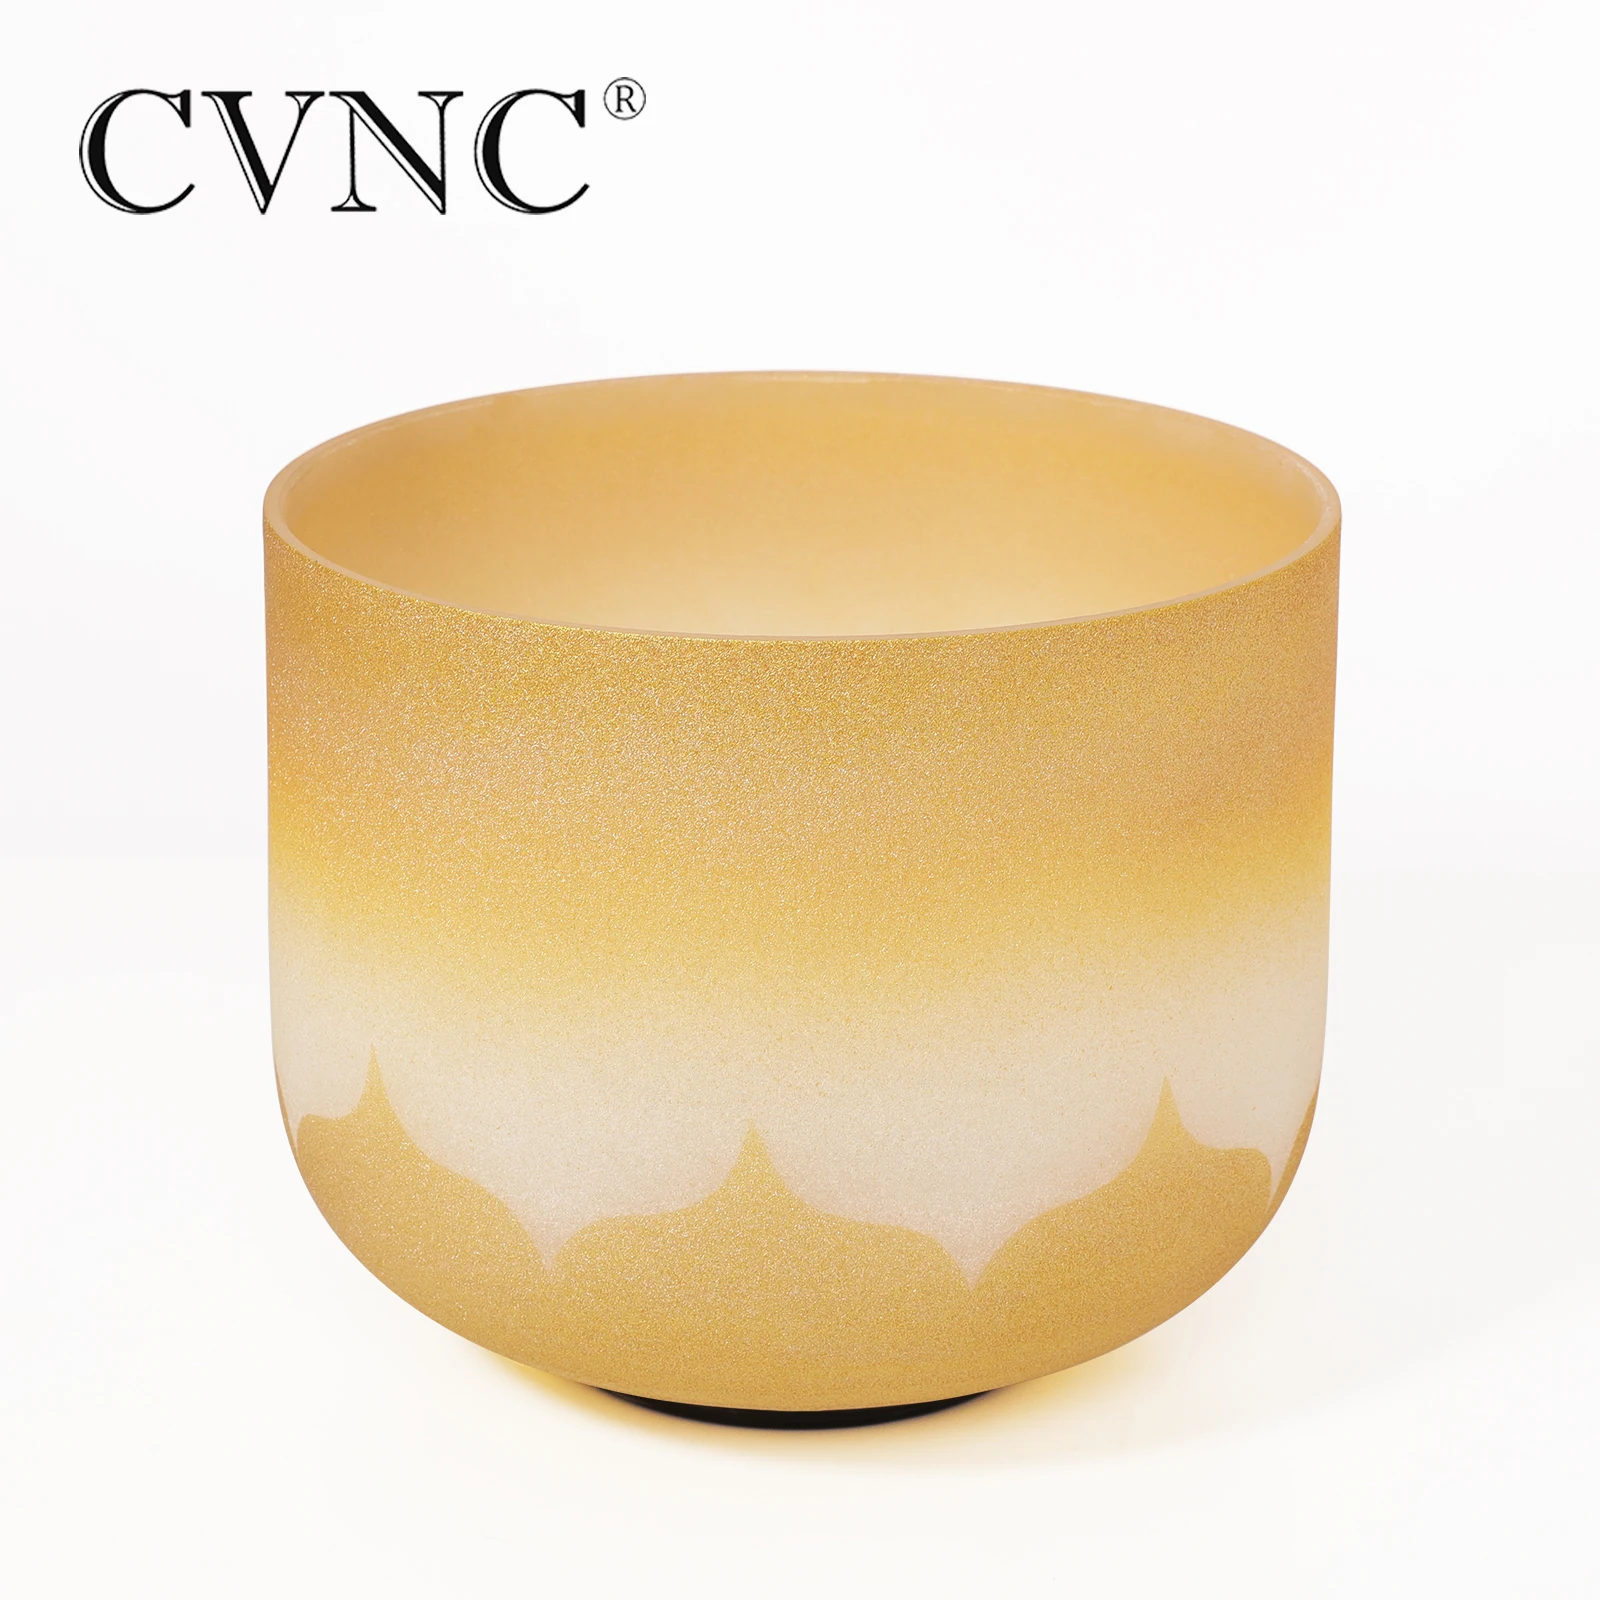 CVNC 12 Inch Gold Lotus Chakra Quartz Crystal Singing Bowl C/D/E/F/G/A/B Note with Free Ruuber Mallet and O-ring for Meditation enlarge